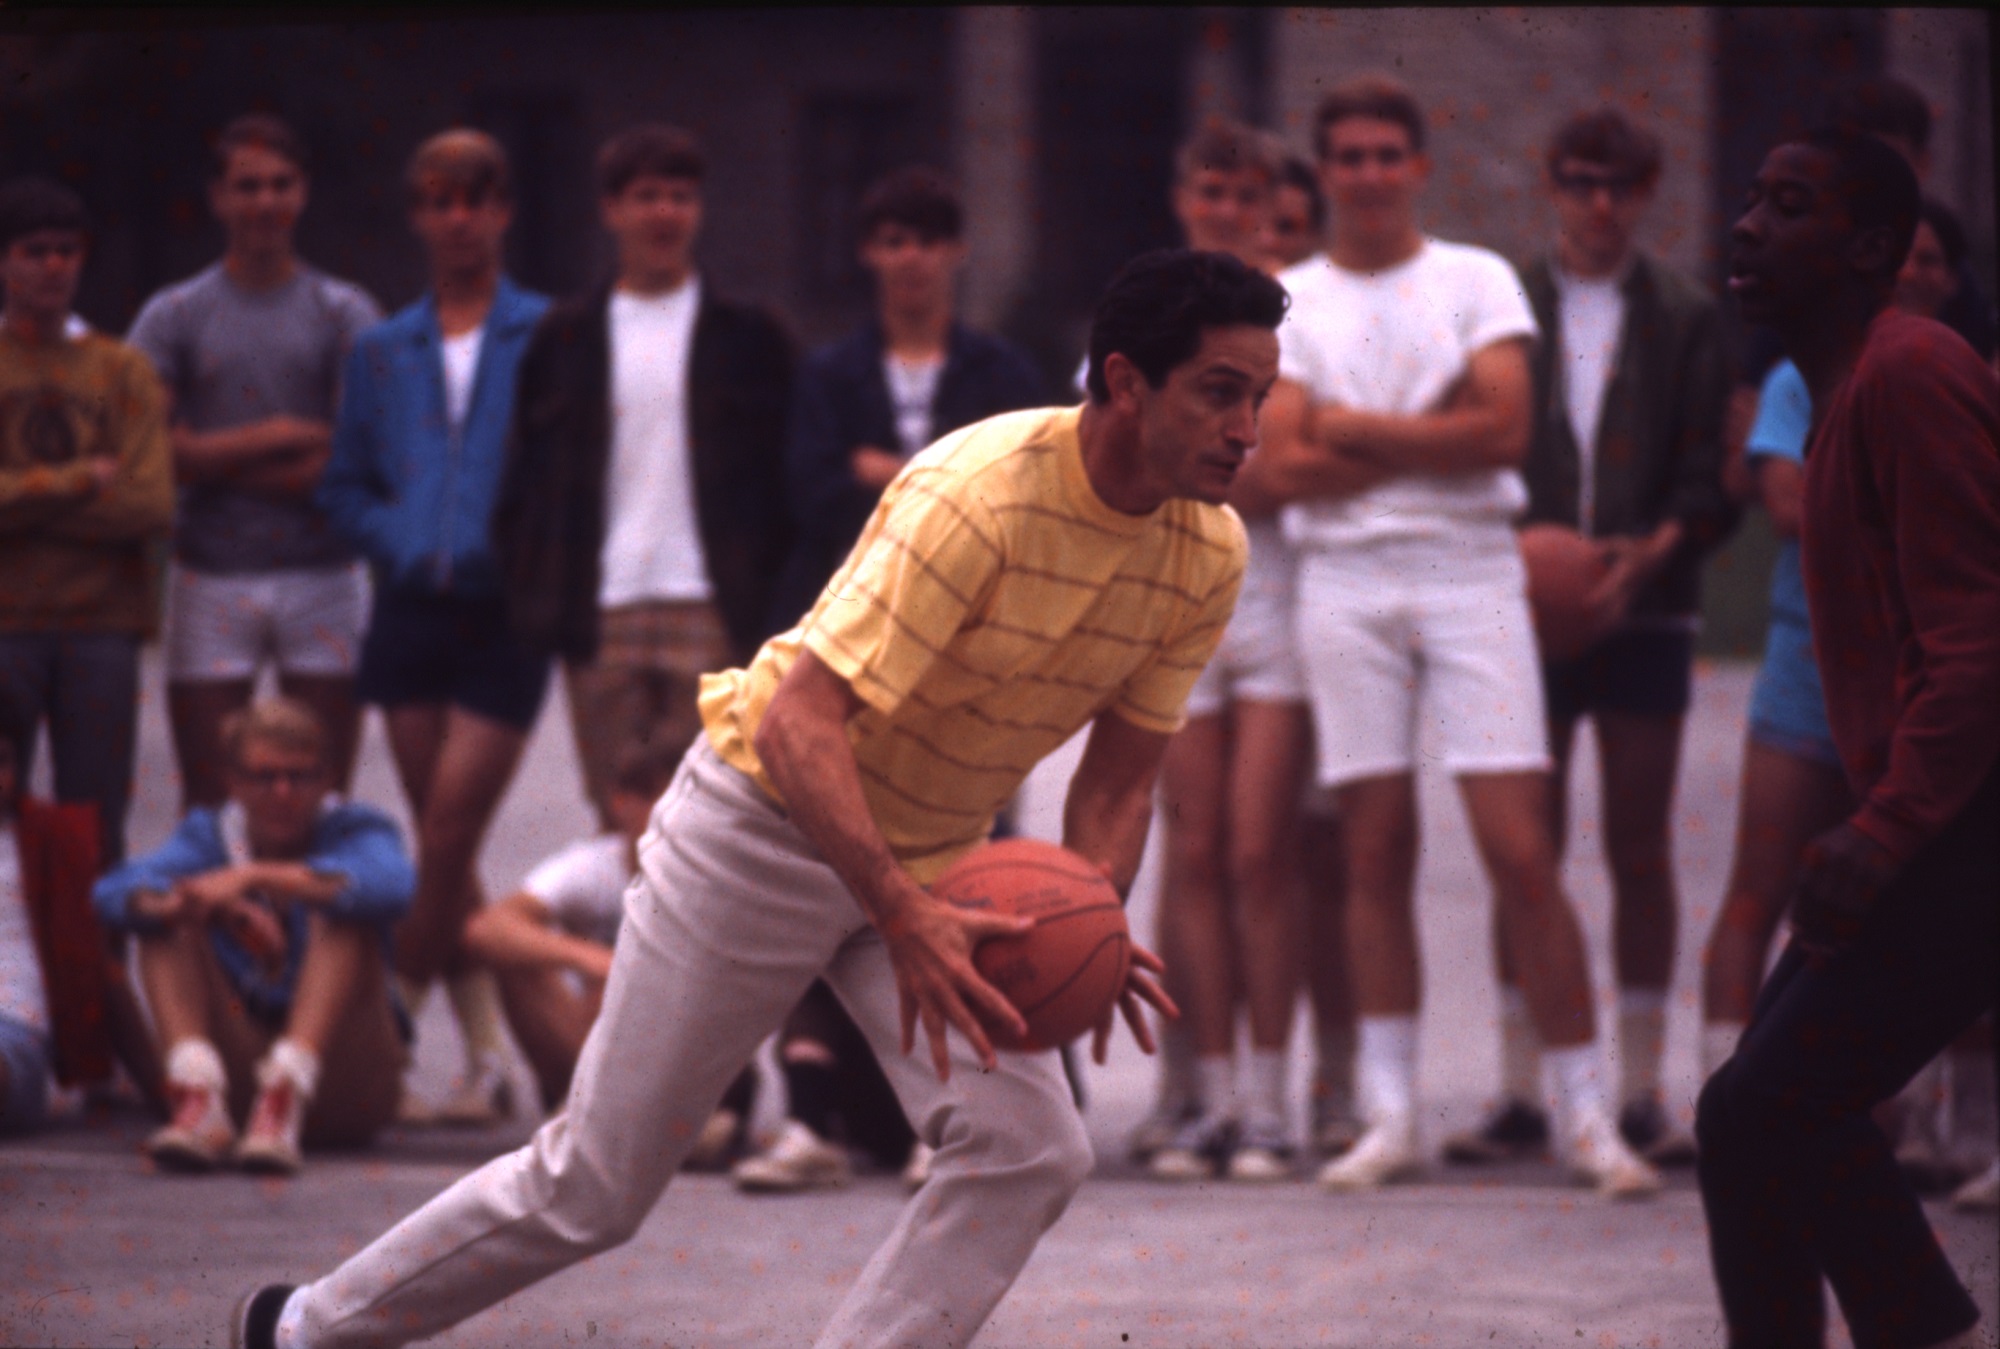 Al McGuire runs with basketball in 1969 or 1970. (Courtesy of the Department of Special Collections and University Archives, Raynor Memorial Libraries, Marquette University)